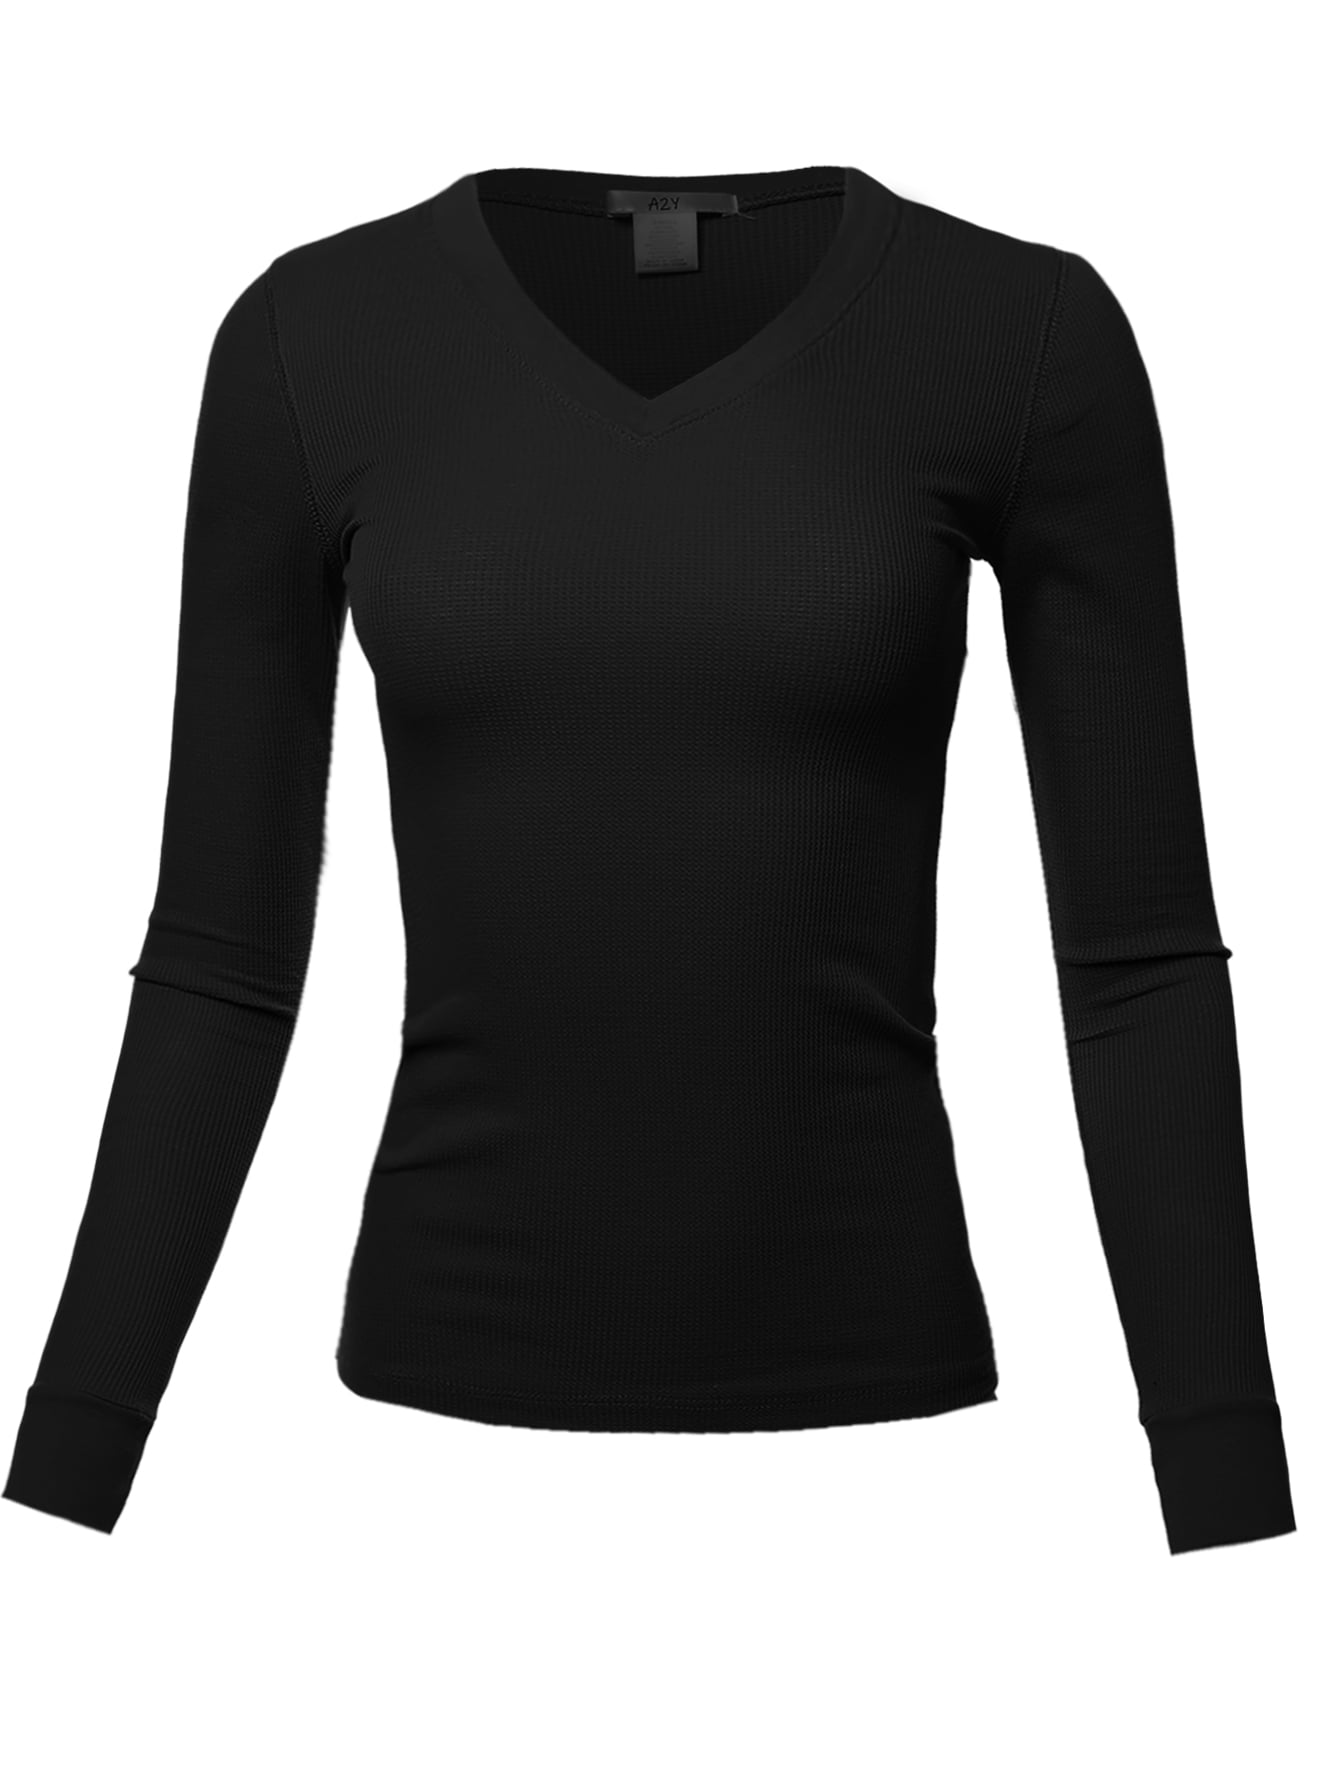 A2Y Women's Basic Solid Fitted Long Sleeve V-Neck Thermal Top 